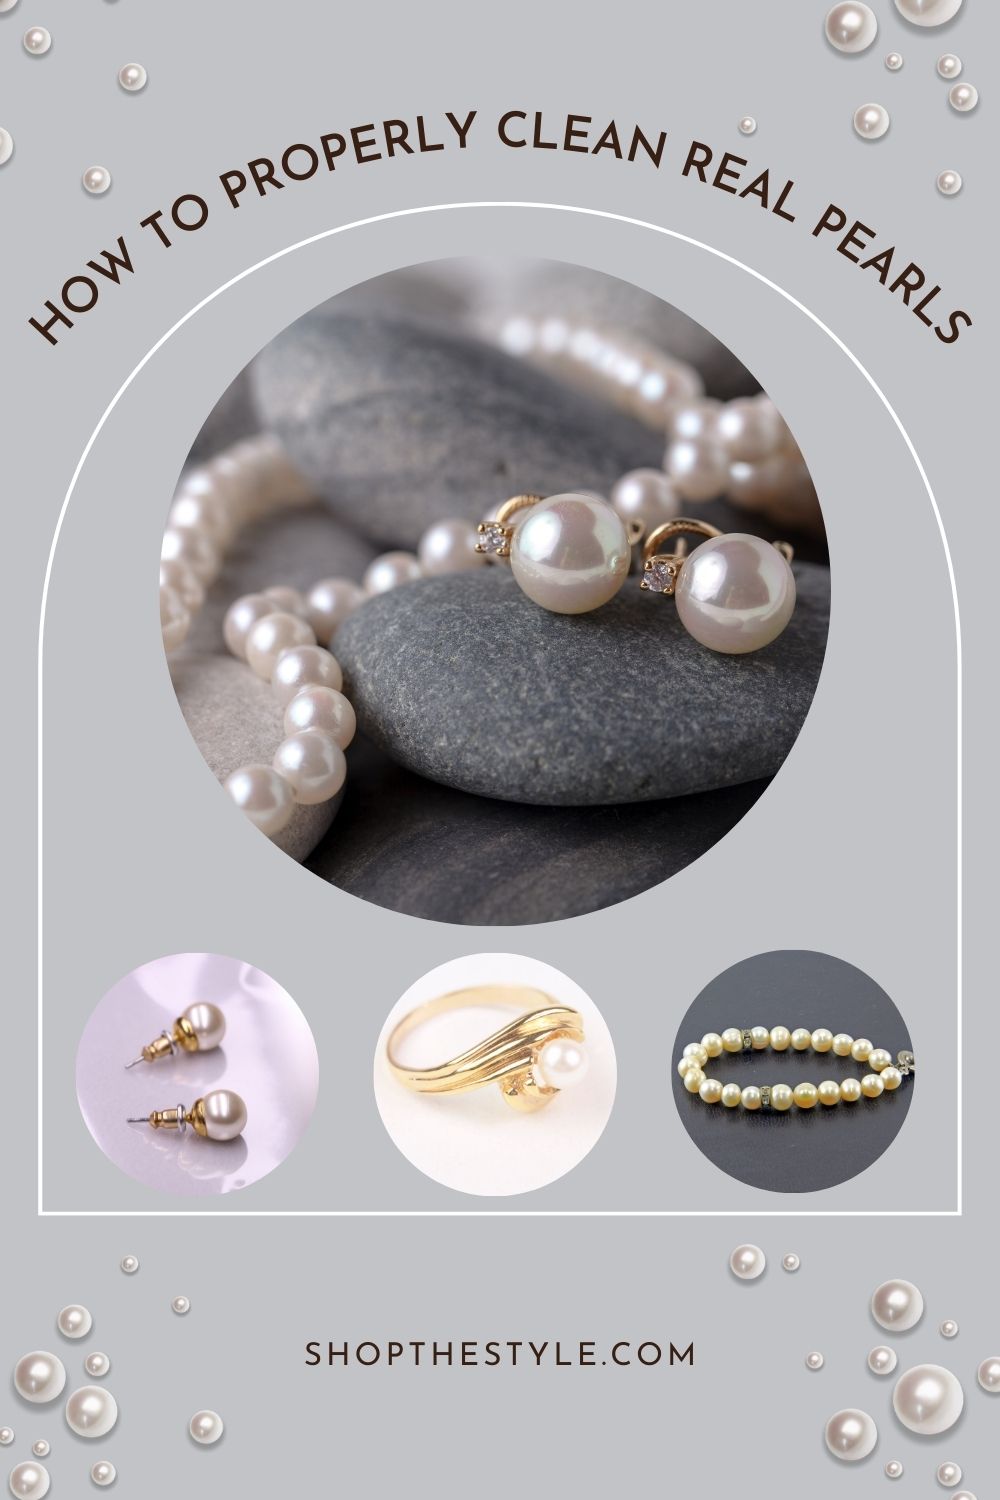 How to Properly Clean Real Pearls